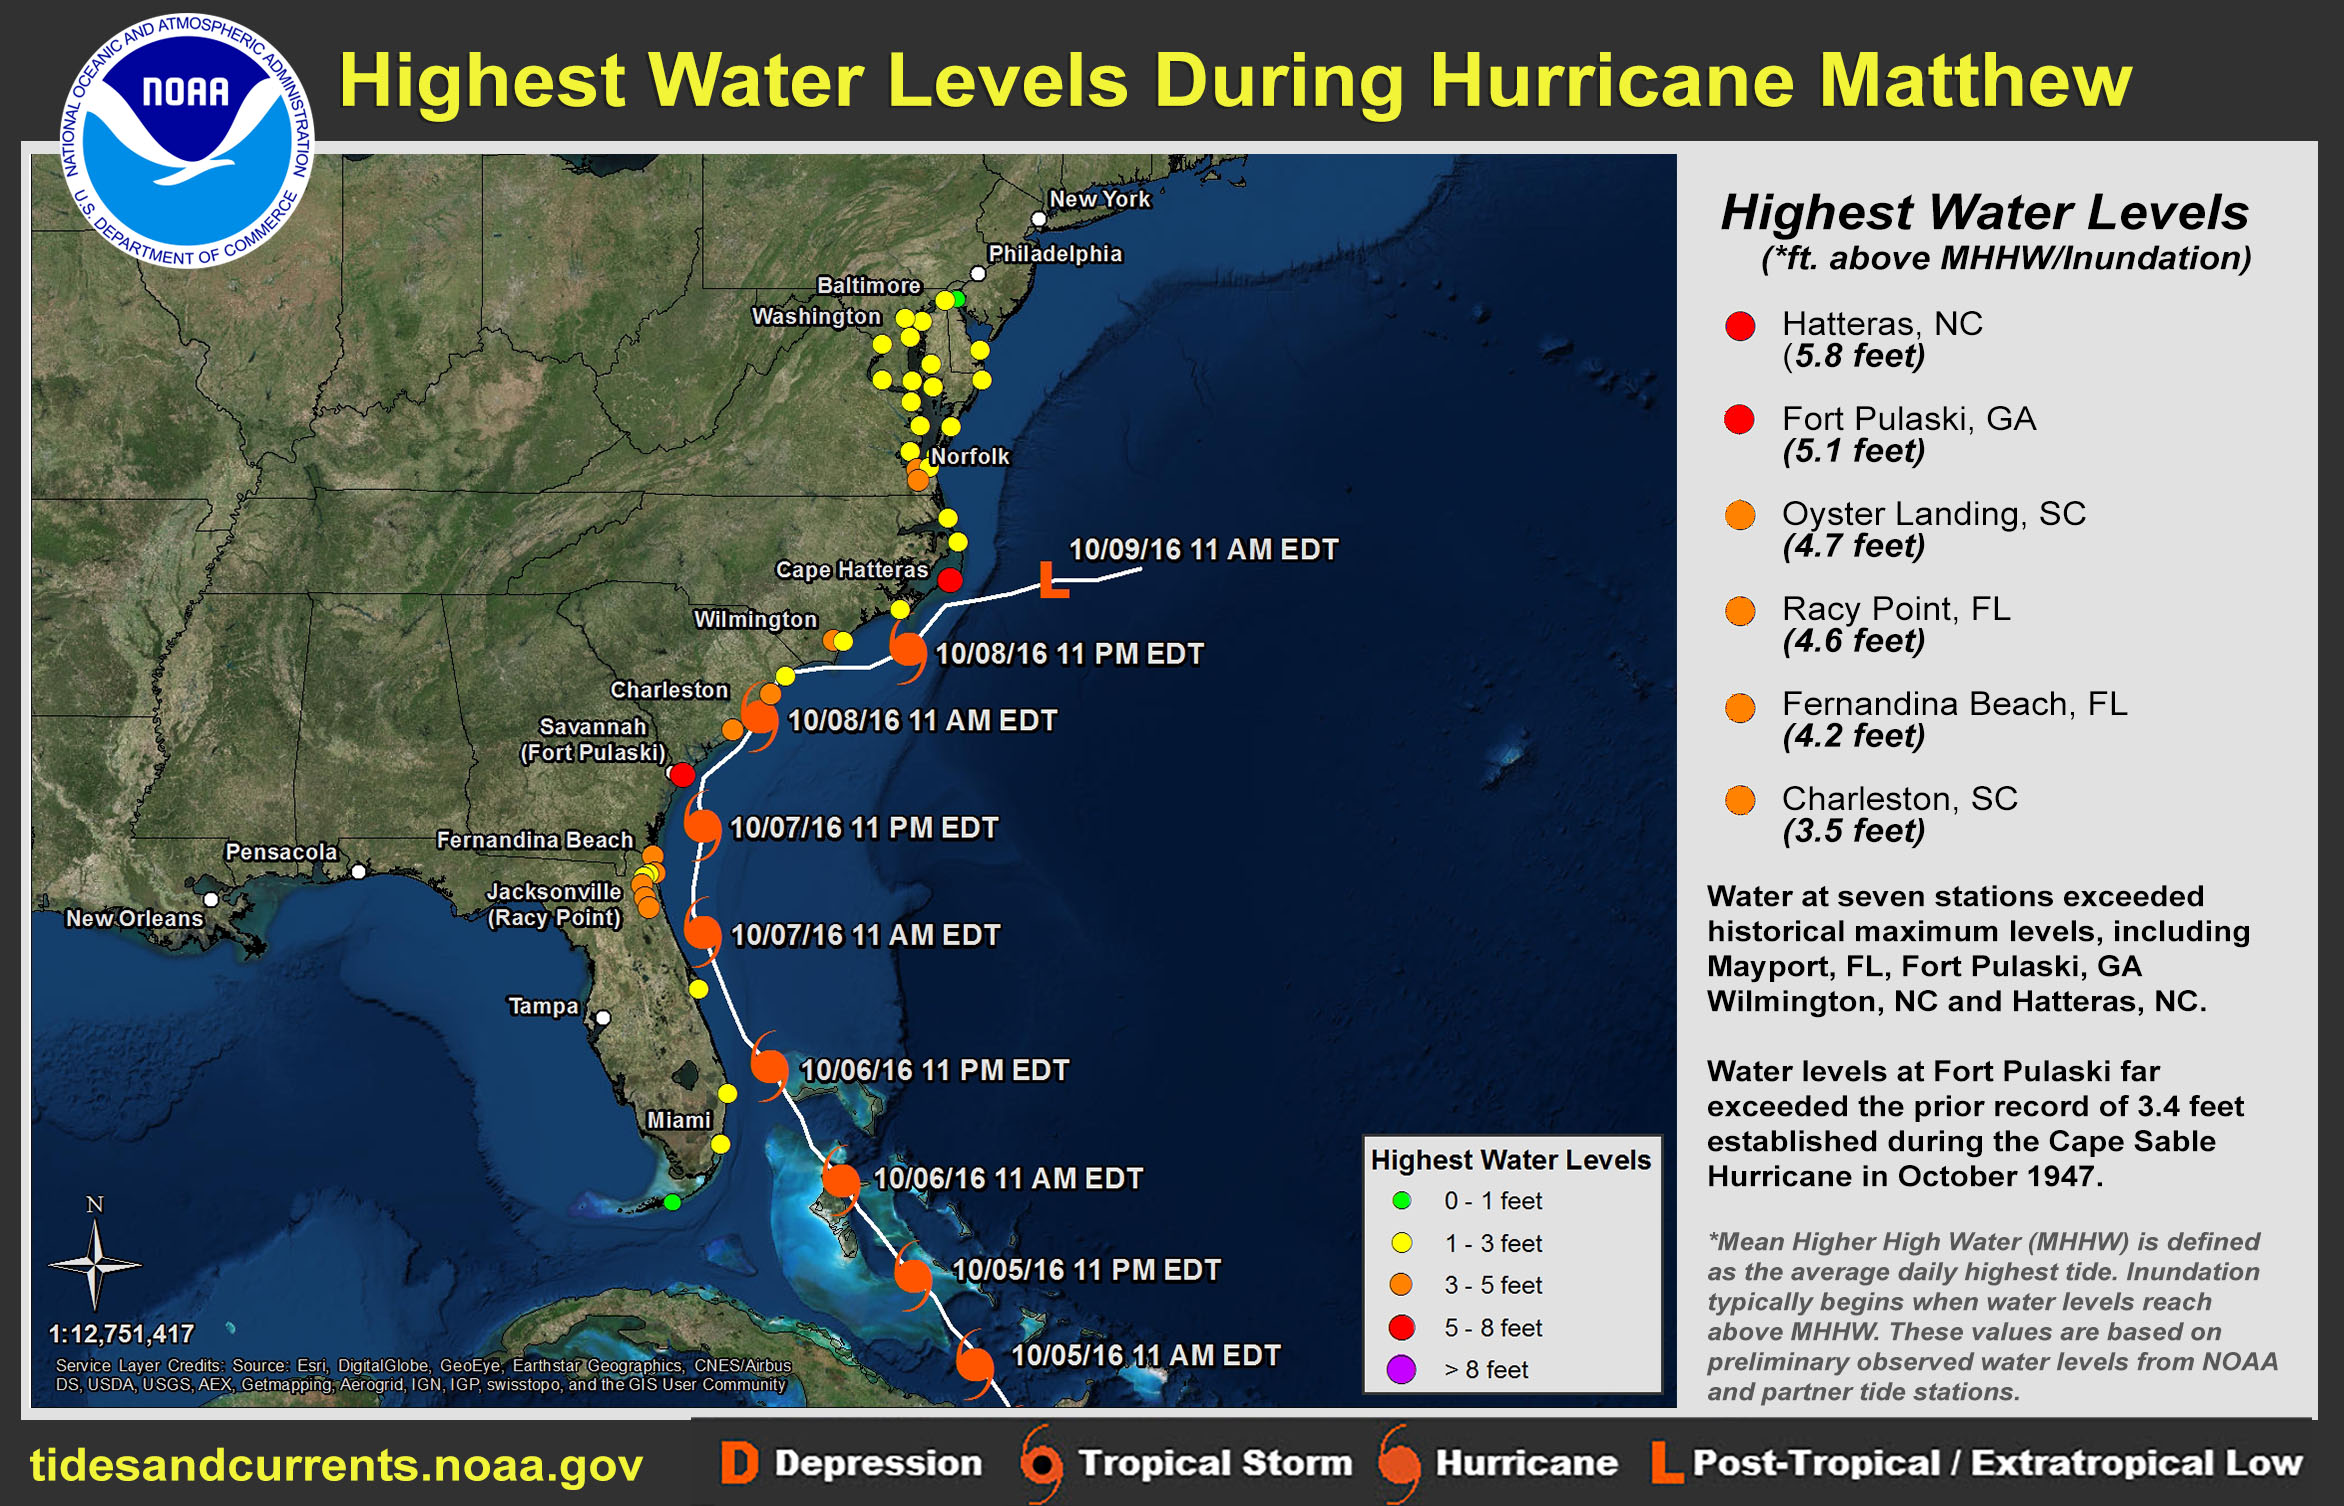 Graphic showing highest water levels during Hurricane Matthew (2016).